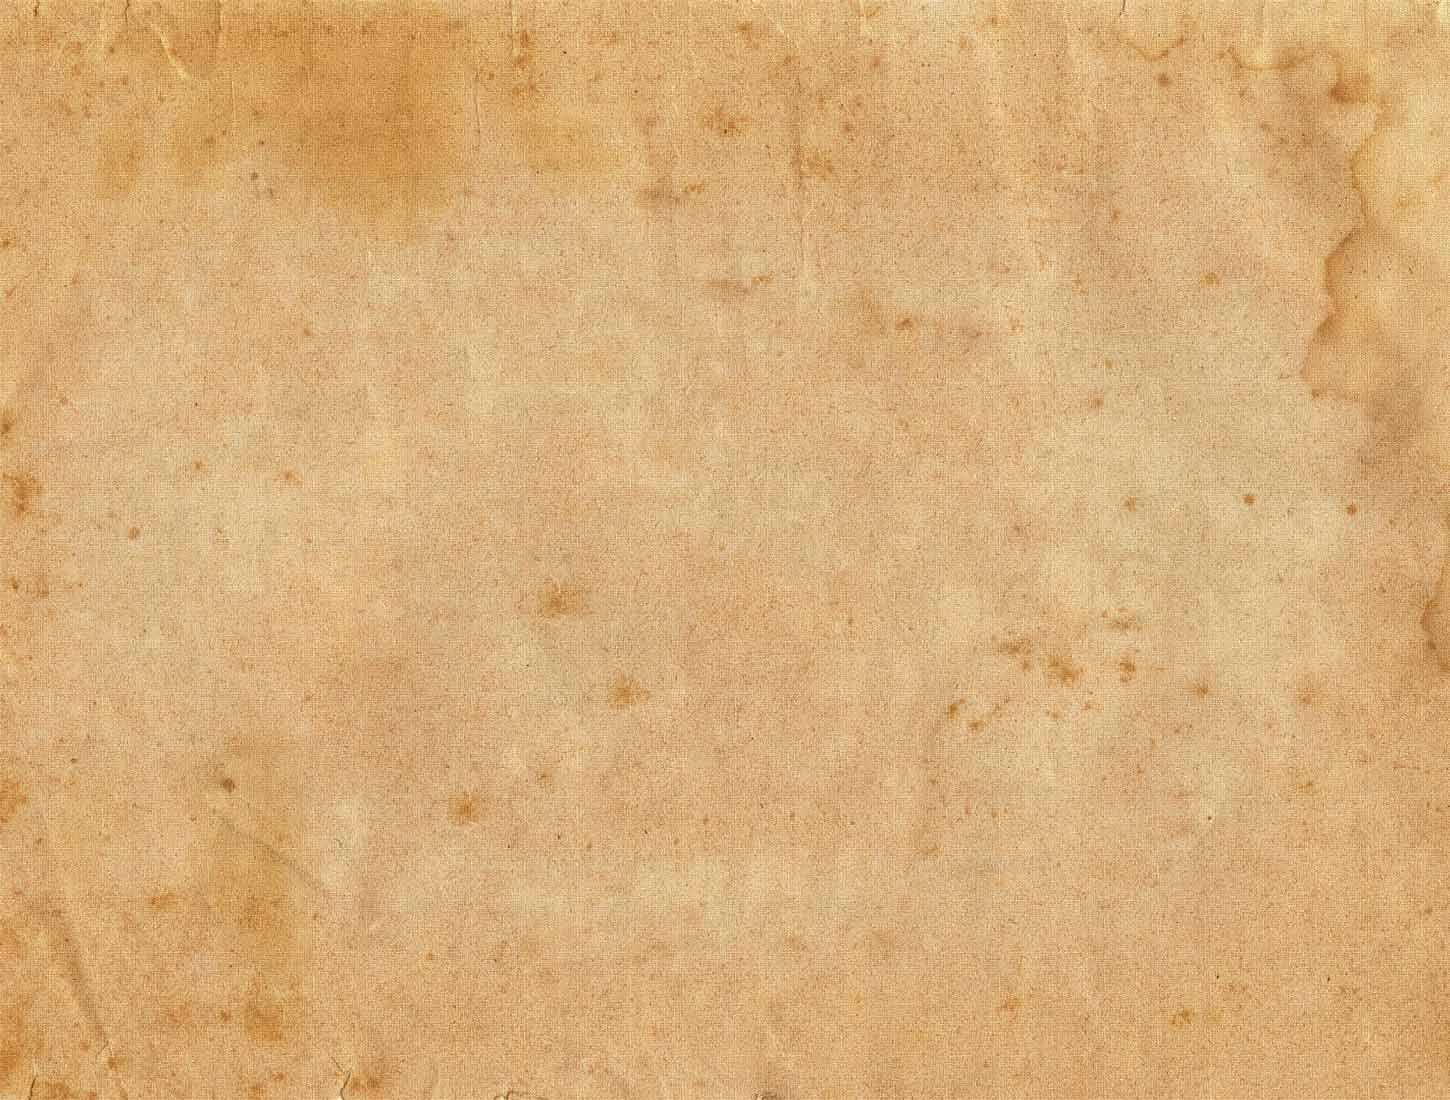 Old Beige Blank Paper Free Ppt Backgrounds For Your In Blank Old Newspaper Template